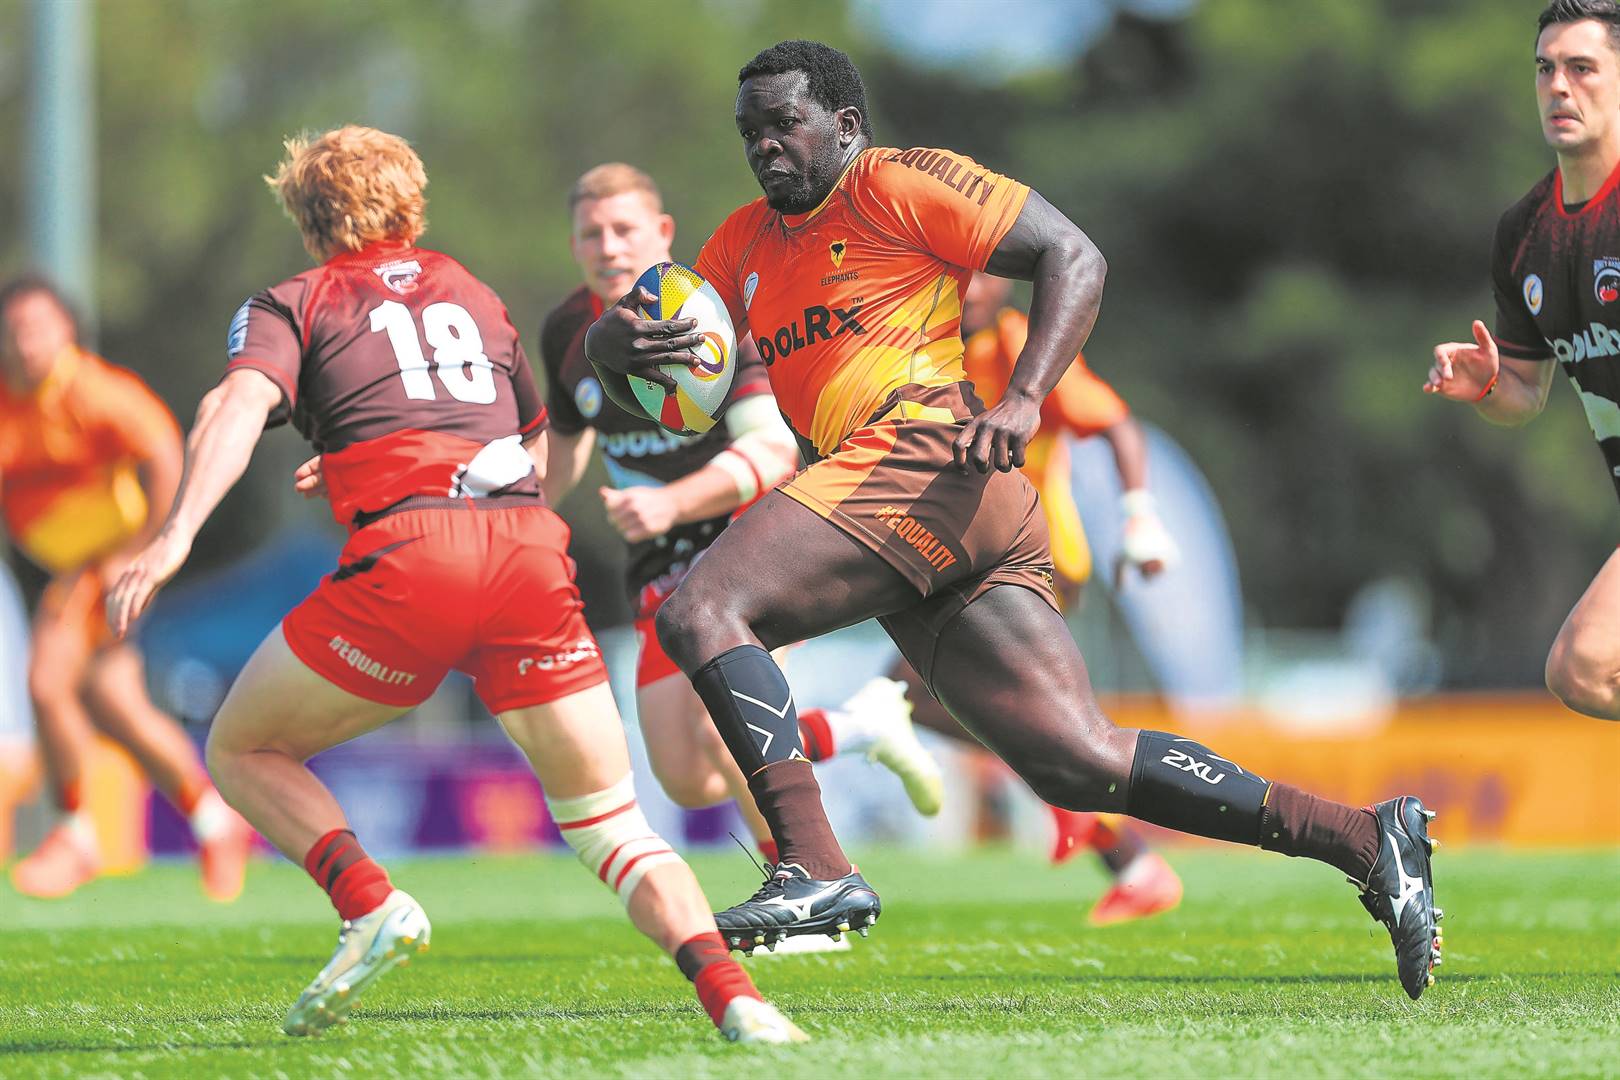 Draw made for 2022 Middle East Africa Rugby League Championship